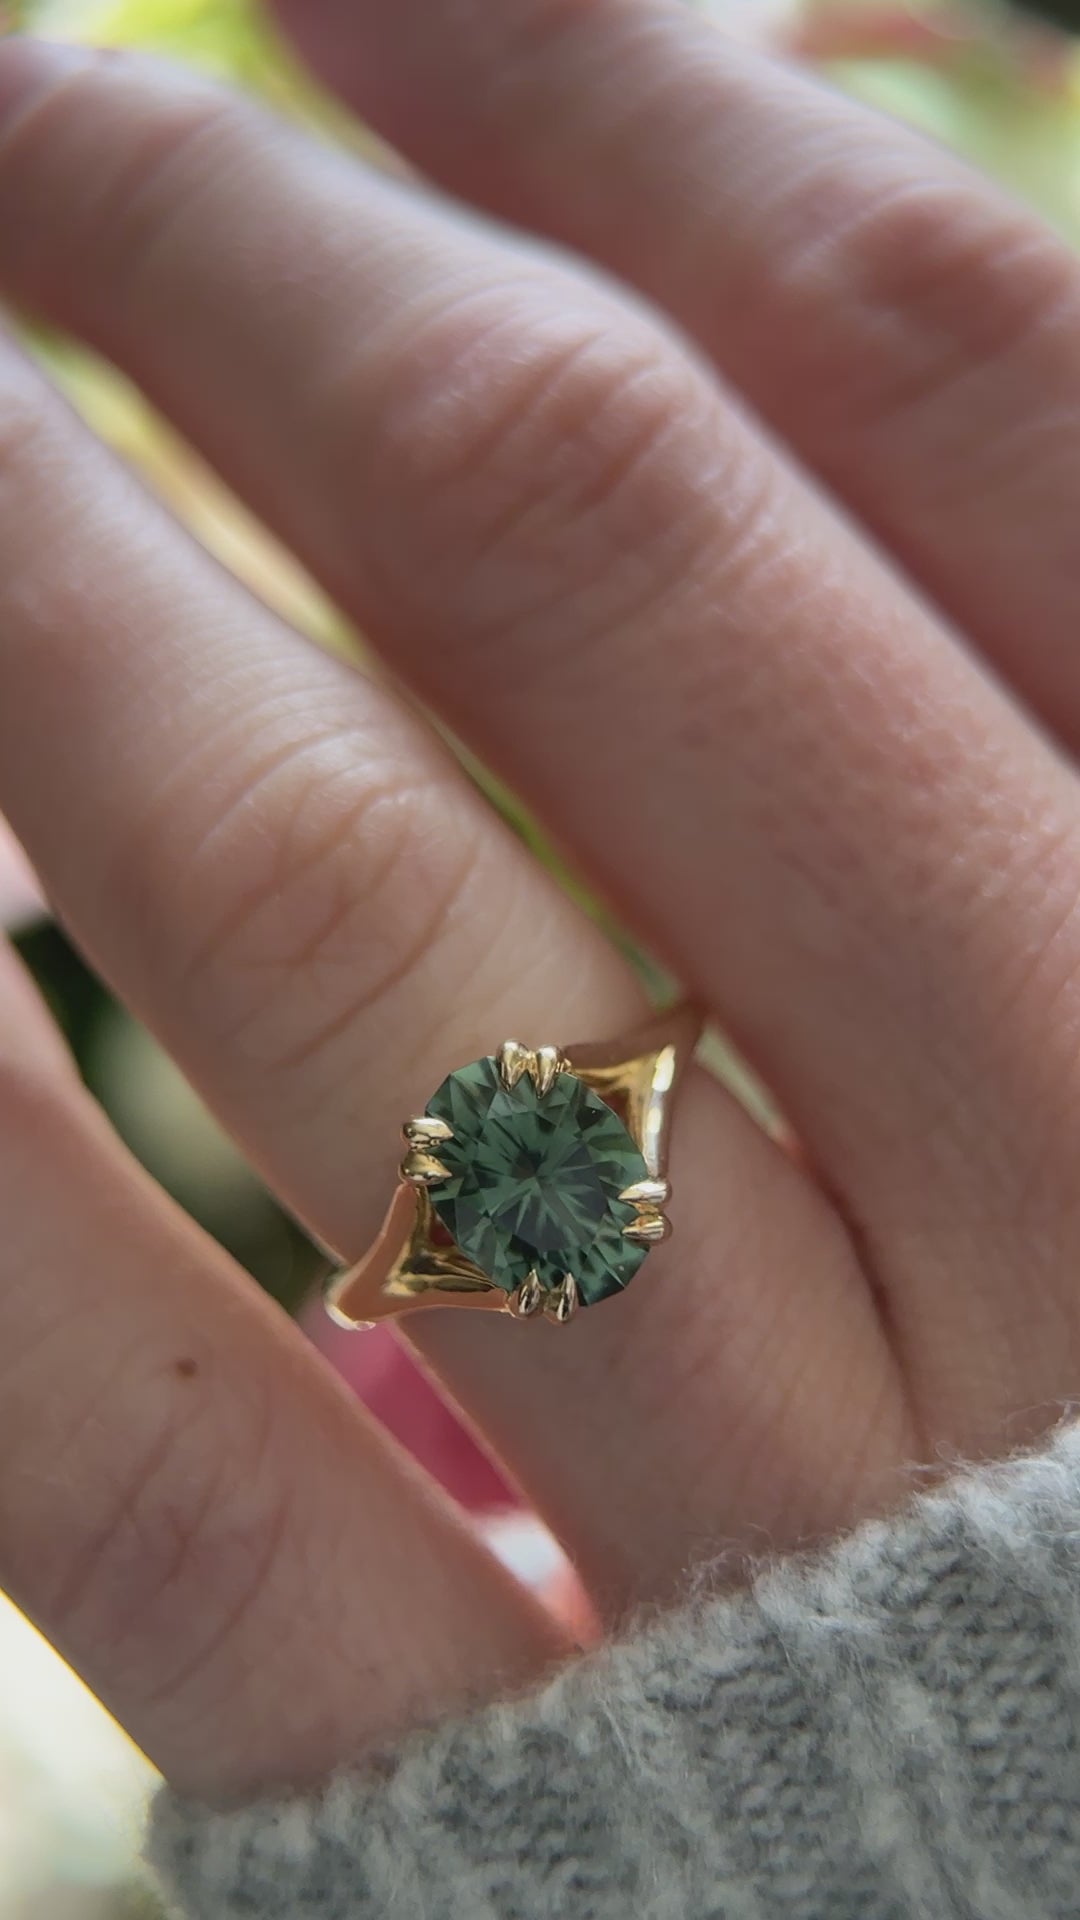 The Weaver Ring - 2.88 CT Oval Forest Green Tourmaline